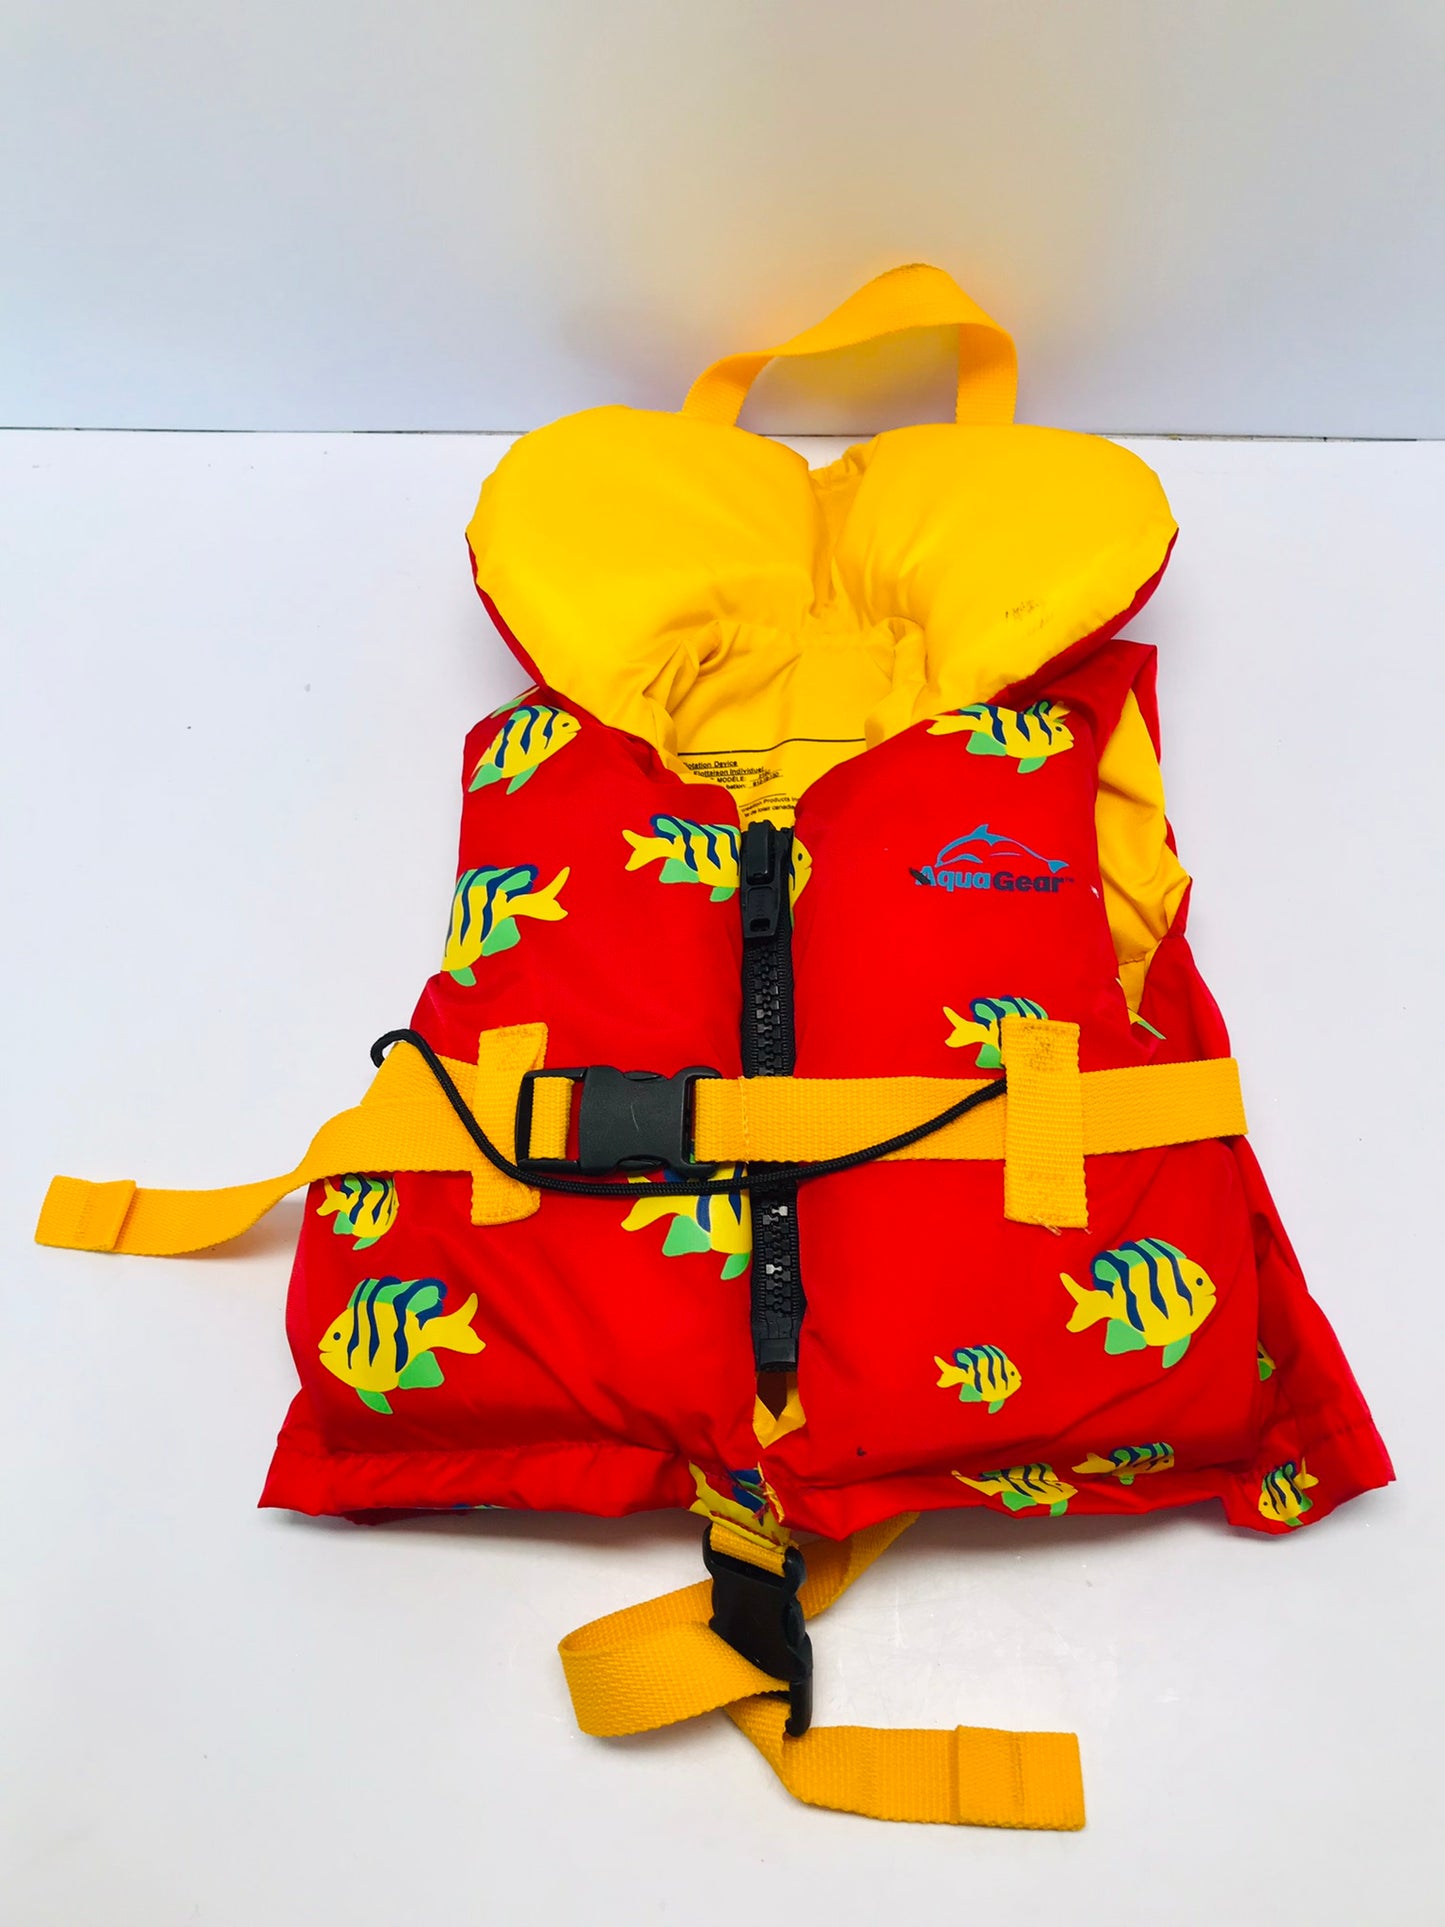 Life Jacket Child Size 30-60 lbs Aqua Gear Red Yellow Excellent